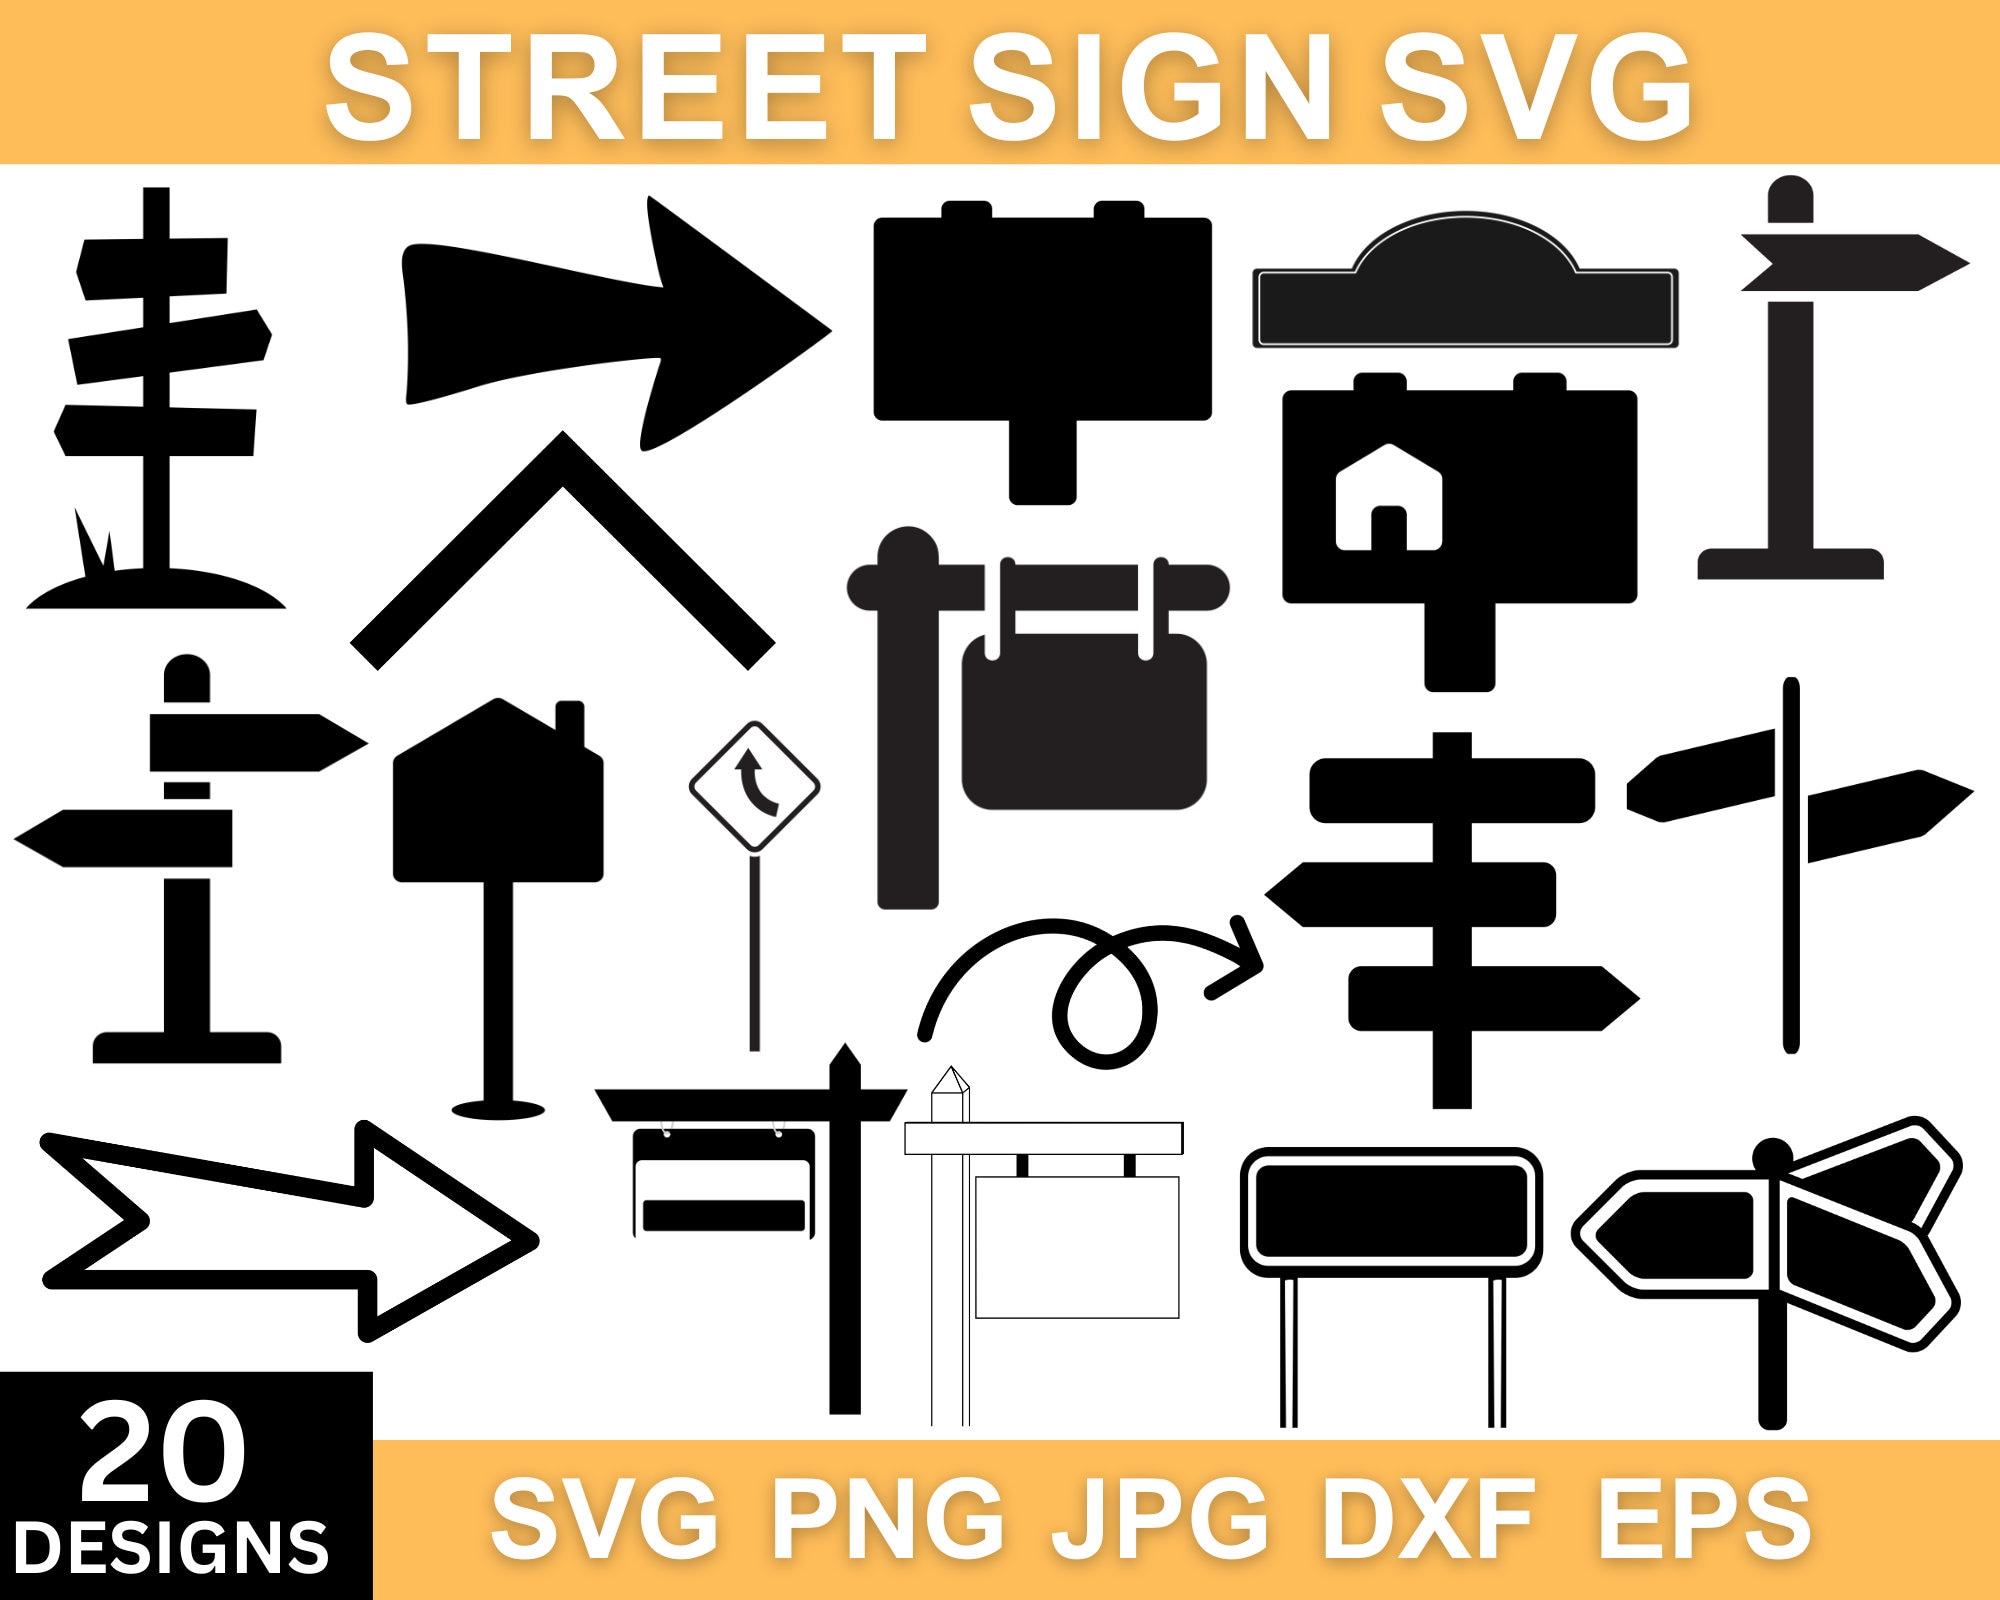 Witch Way Street Sign SVG Graphic by Atelier Design · Creative Fabrica